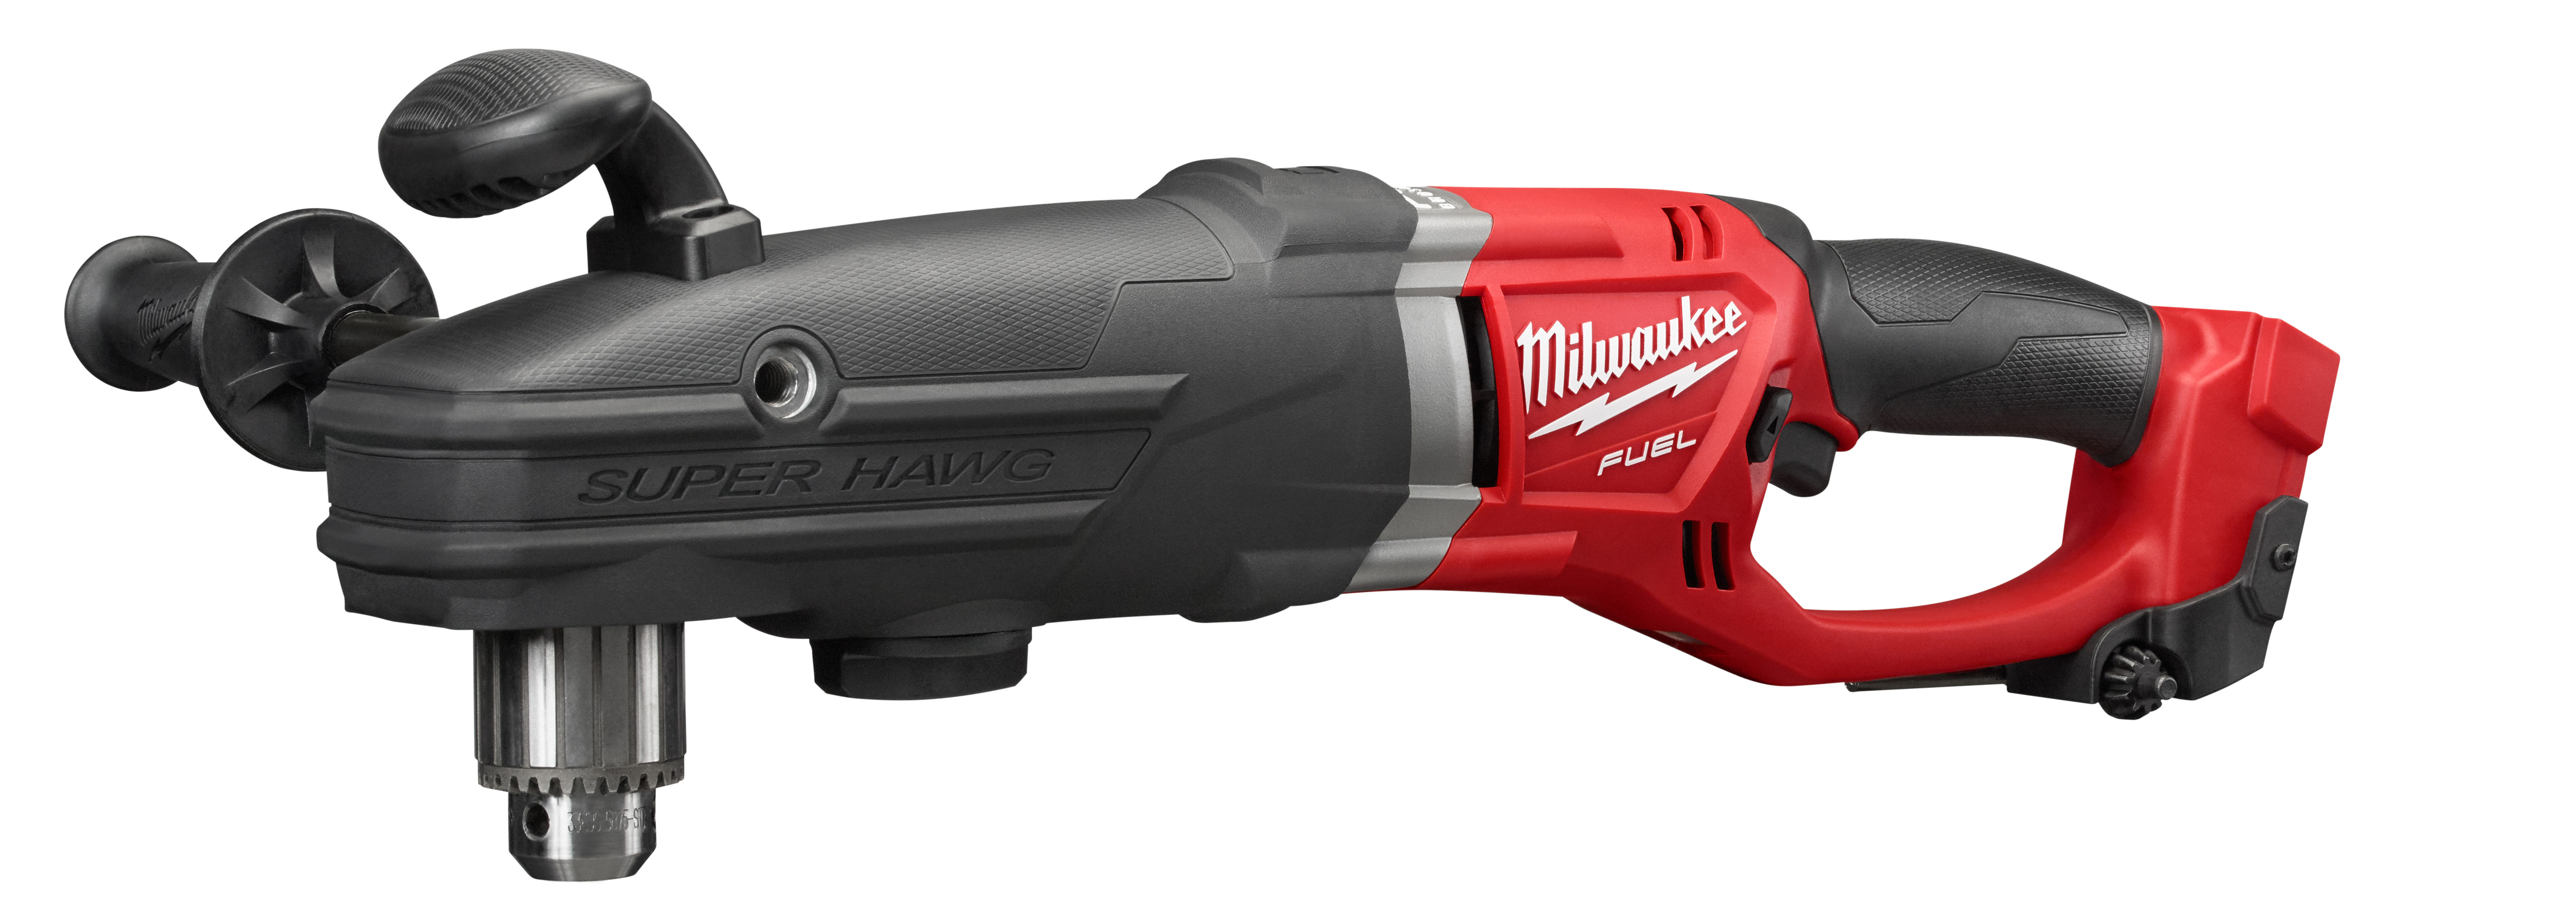 The first tool of its kind, the M18 FUEL™ SUPER HAWG™ delivers the power and run-time necessary to complete cordless rough-ins. Optimized for Plumbing and HVAC professionals, this drill powers through 6” holes and can drill over (75) 2-9/16” holes per charge in 2x dimensional lumber with a self-feed bit. The POWERSTATE® brushless motor delivers constant power under heavy load to maintain drilling speed. REDLINK PLUS™ Intelligence is the most advanced electronic system on the market, preventing damage to the tool and battery caused by overloading or overheating. The REDLITHIUM™ XC5.0 batteries deliver up to 2.5X more run-time, 20PERC more power and 2X more life than standard 18 volt lithium-ion batteries. A mechanical clutch in low speed protects the tool from damage in the case that a bit binds up and the tool stalls. Bullets: POWERSTATE™ Brushless Motor provides constant power under load to power through 6" Holes REDLINK™ PLUS Intelligence Ensures optimal performance and overload protection to prevent damage to the tool or battery during heavy applications. 62608